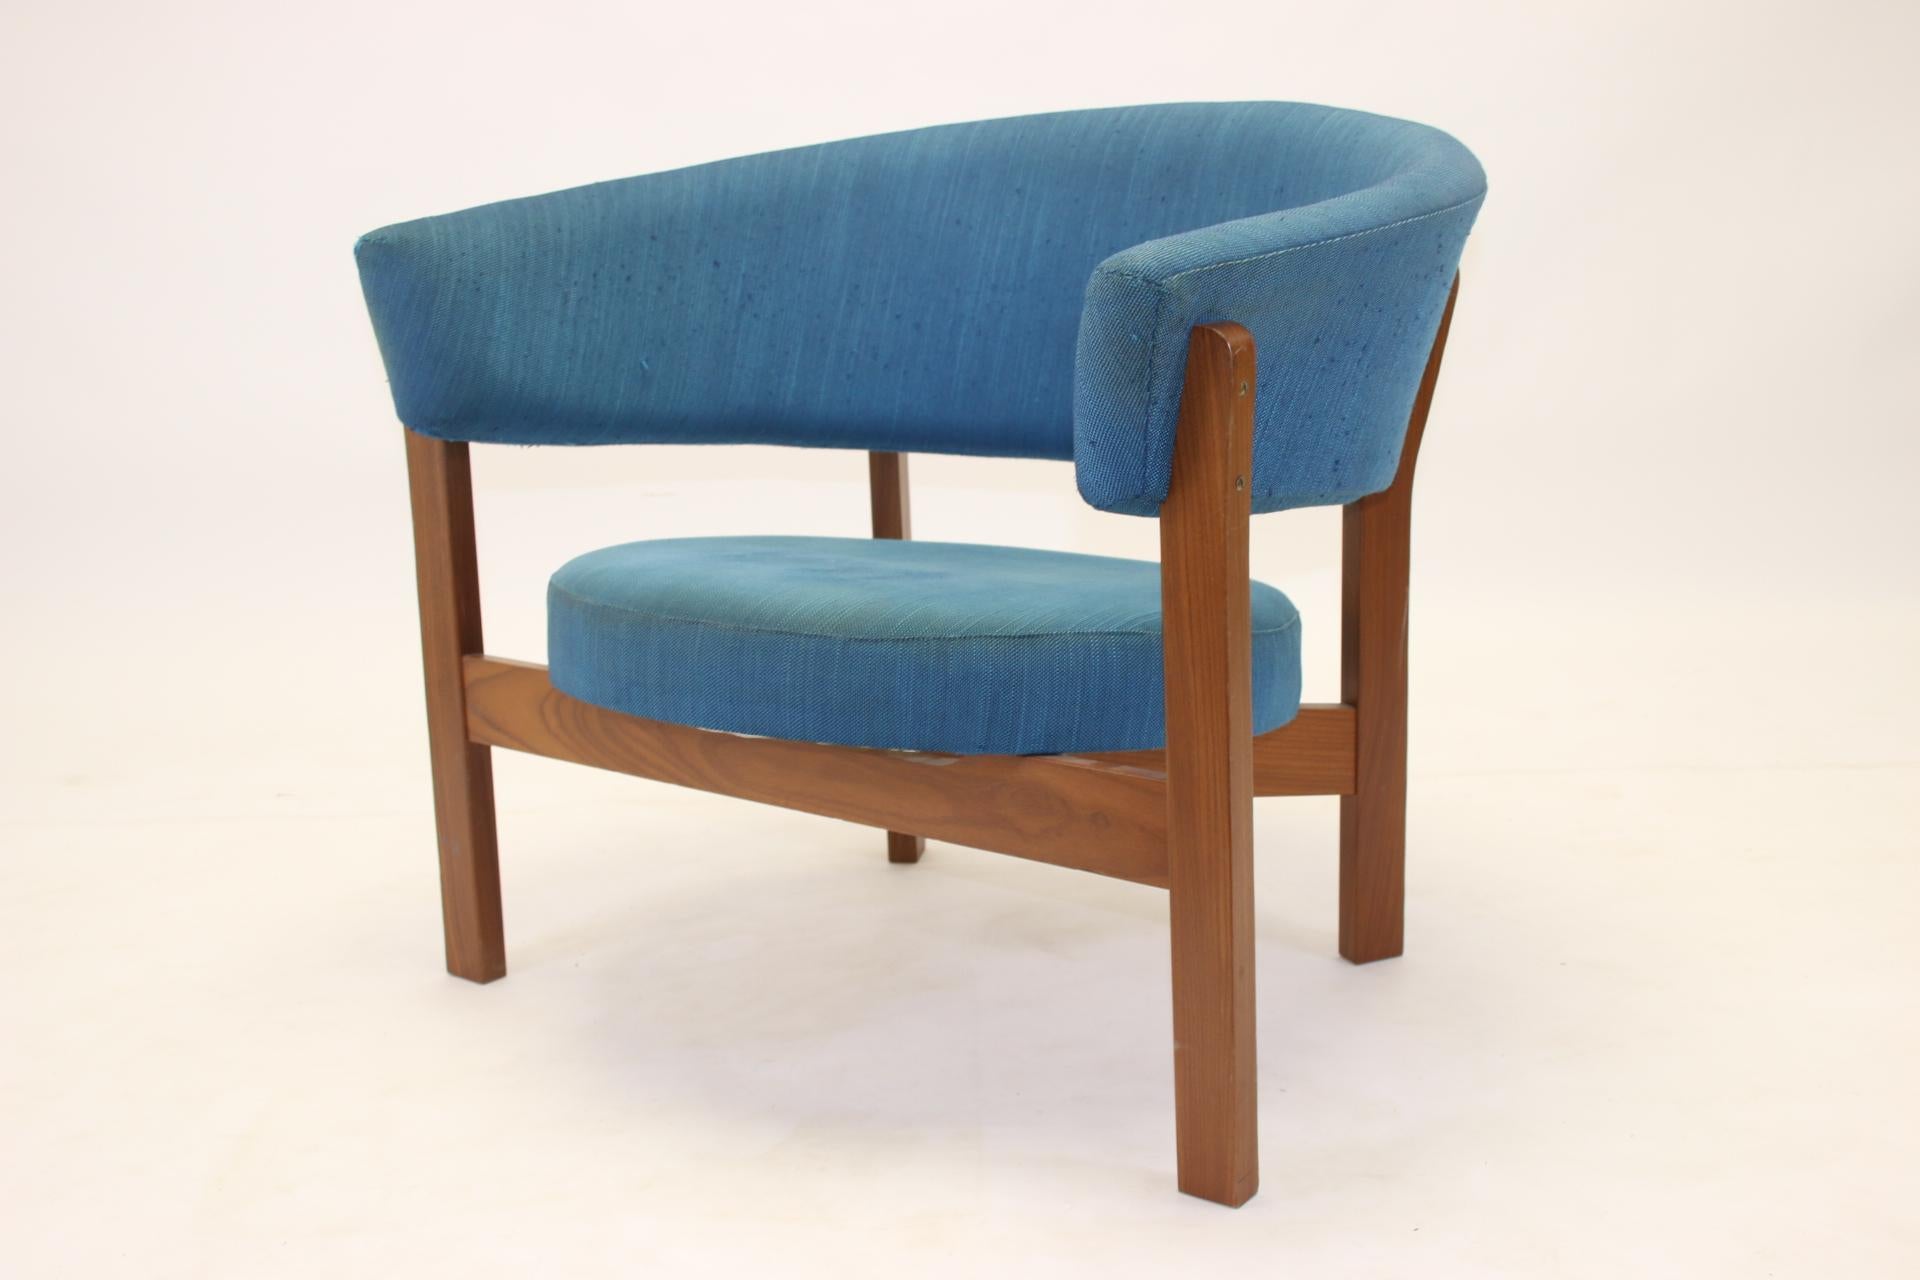 Model Prim rare old Swedish design chair.

the designers of Ikea used to be THE icon of design and design.

the user-friendliness and the way in which the designers for Ikea published their first designs around the 1960s caused the big